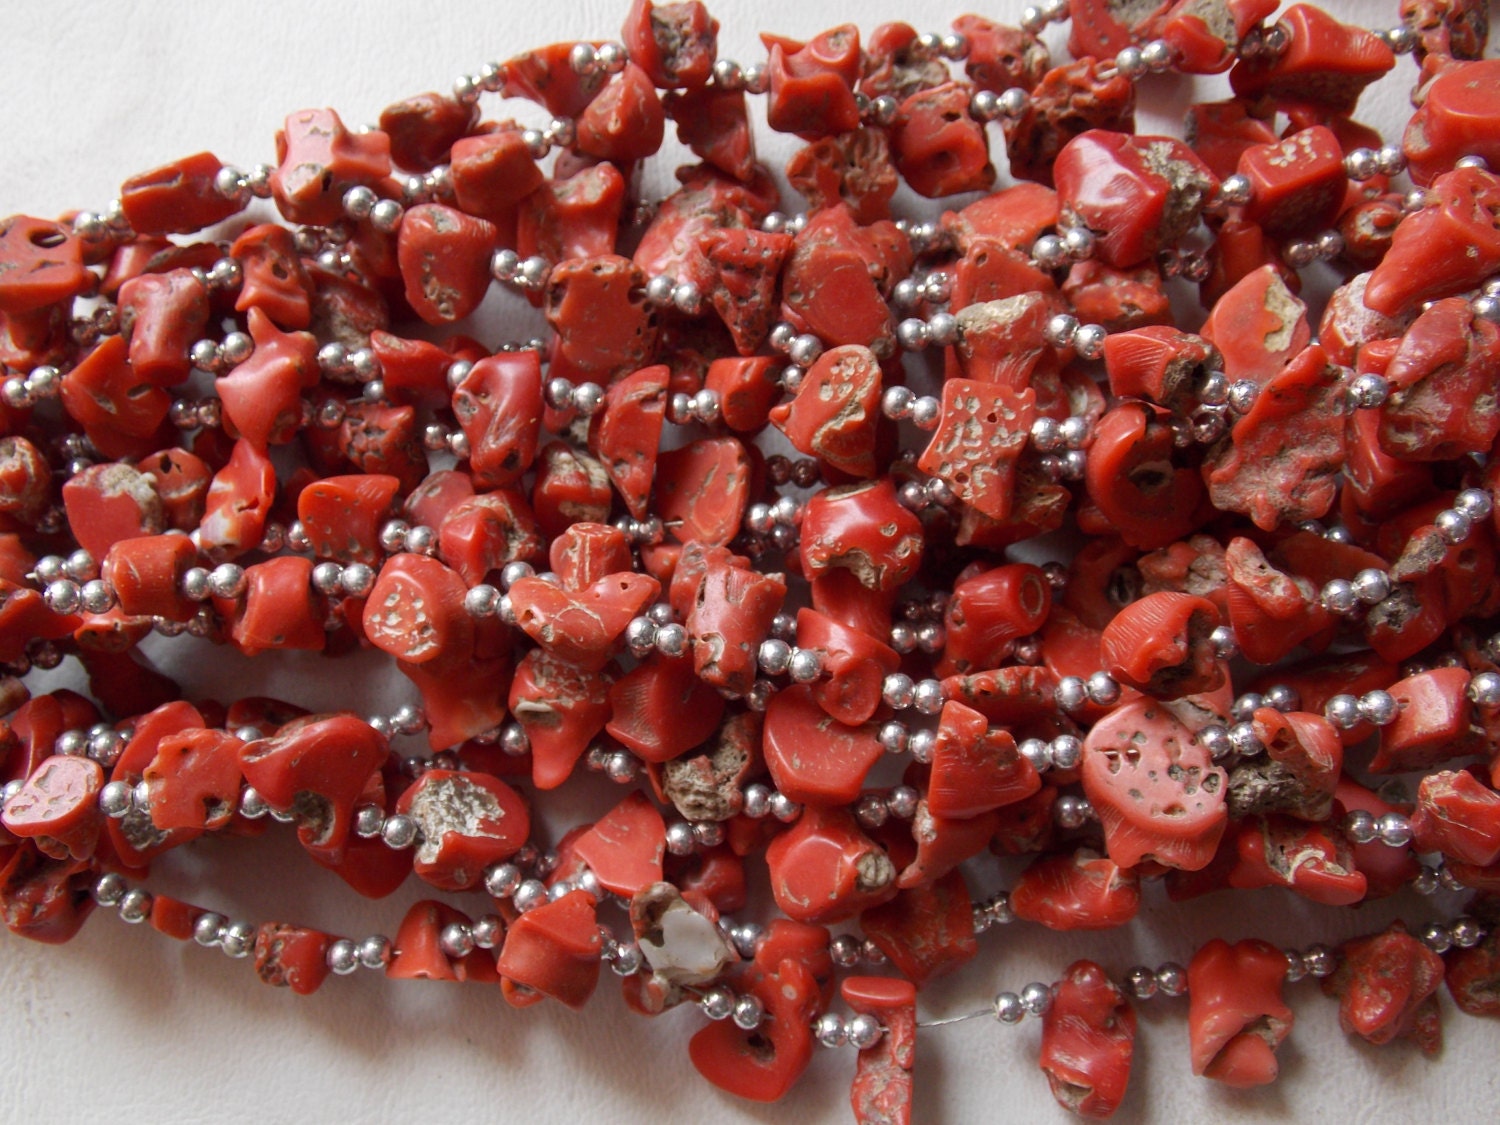 Red Coral Natural Rough Slice,Slab,Stick,Bead,Briolette,Sideways Drill,Loose Stone,14Inch 15X13To10X5MM Approx,Wholesaler,Supplies WM-CR1 | Save 33% - Rajasthan Living 13